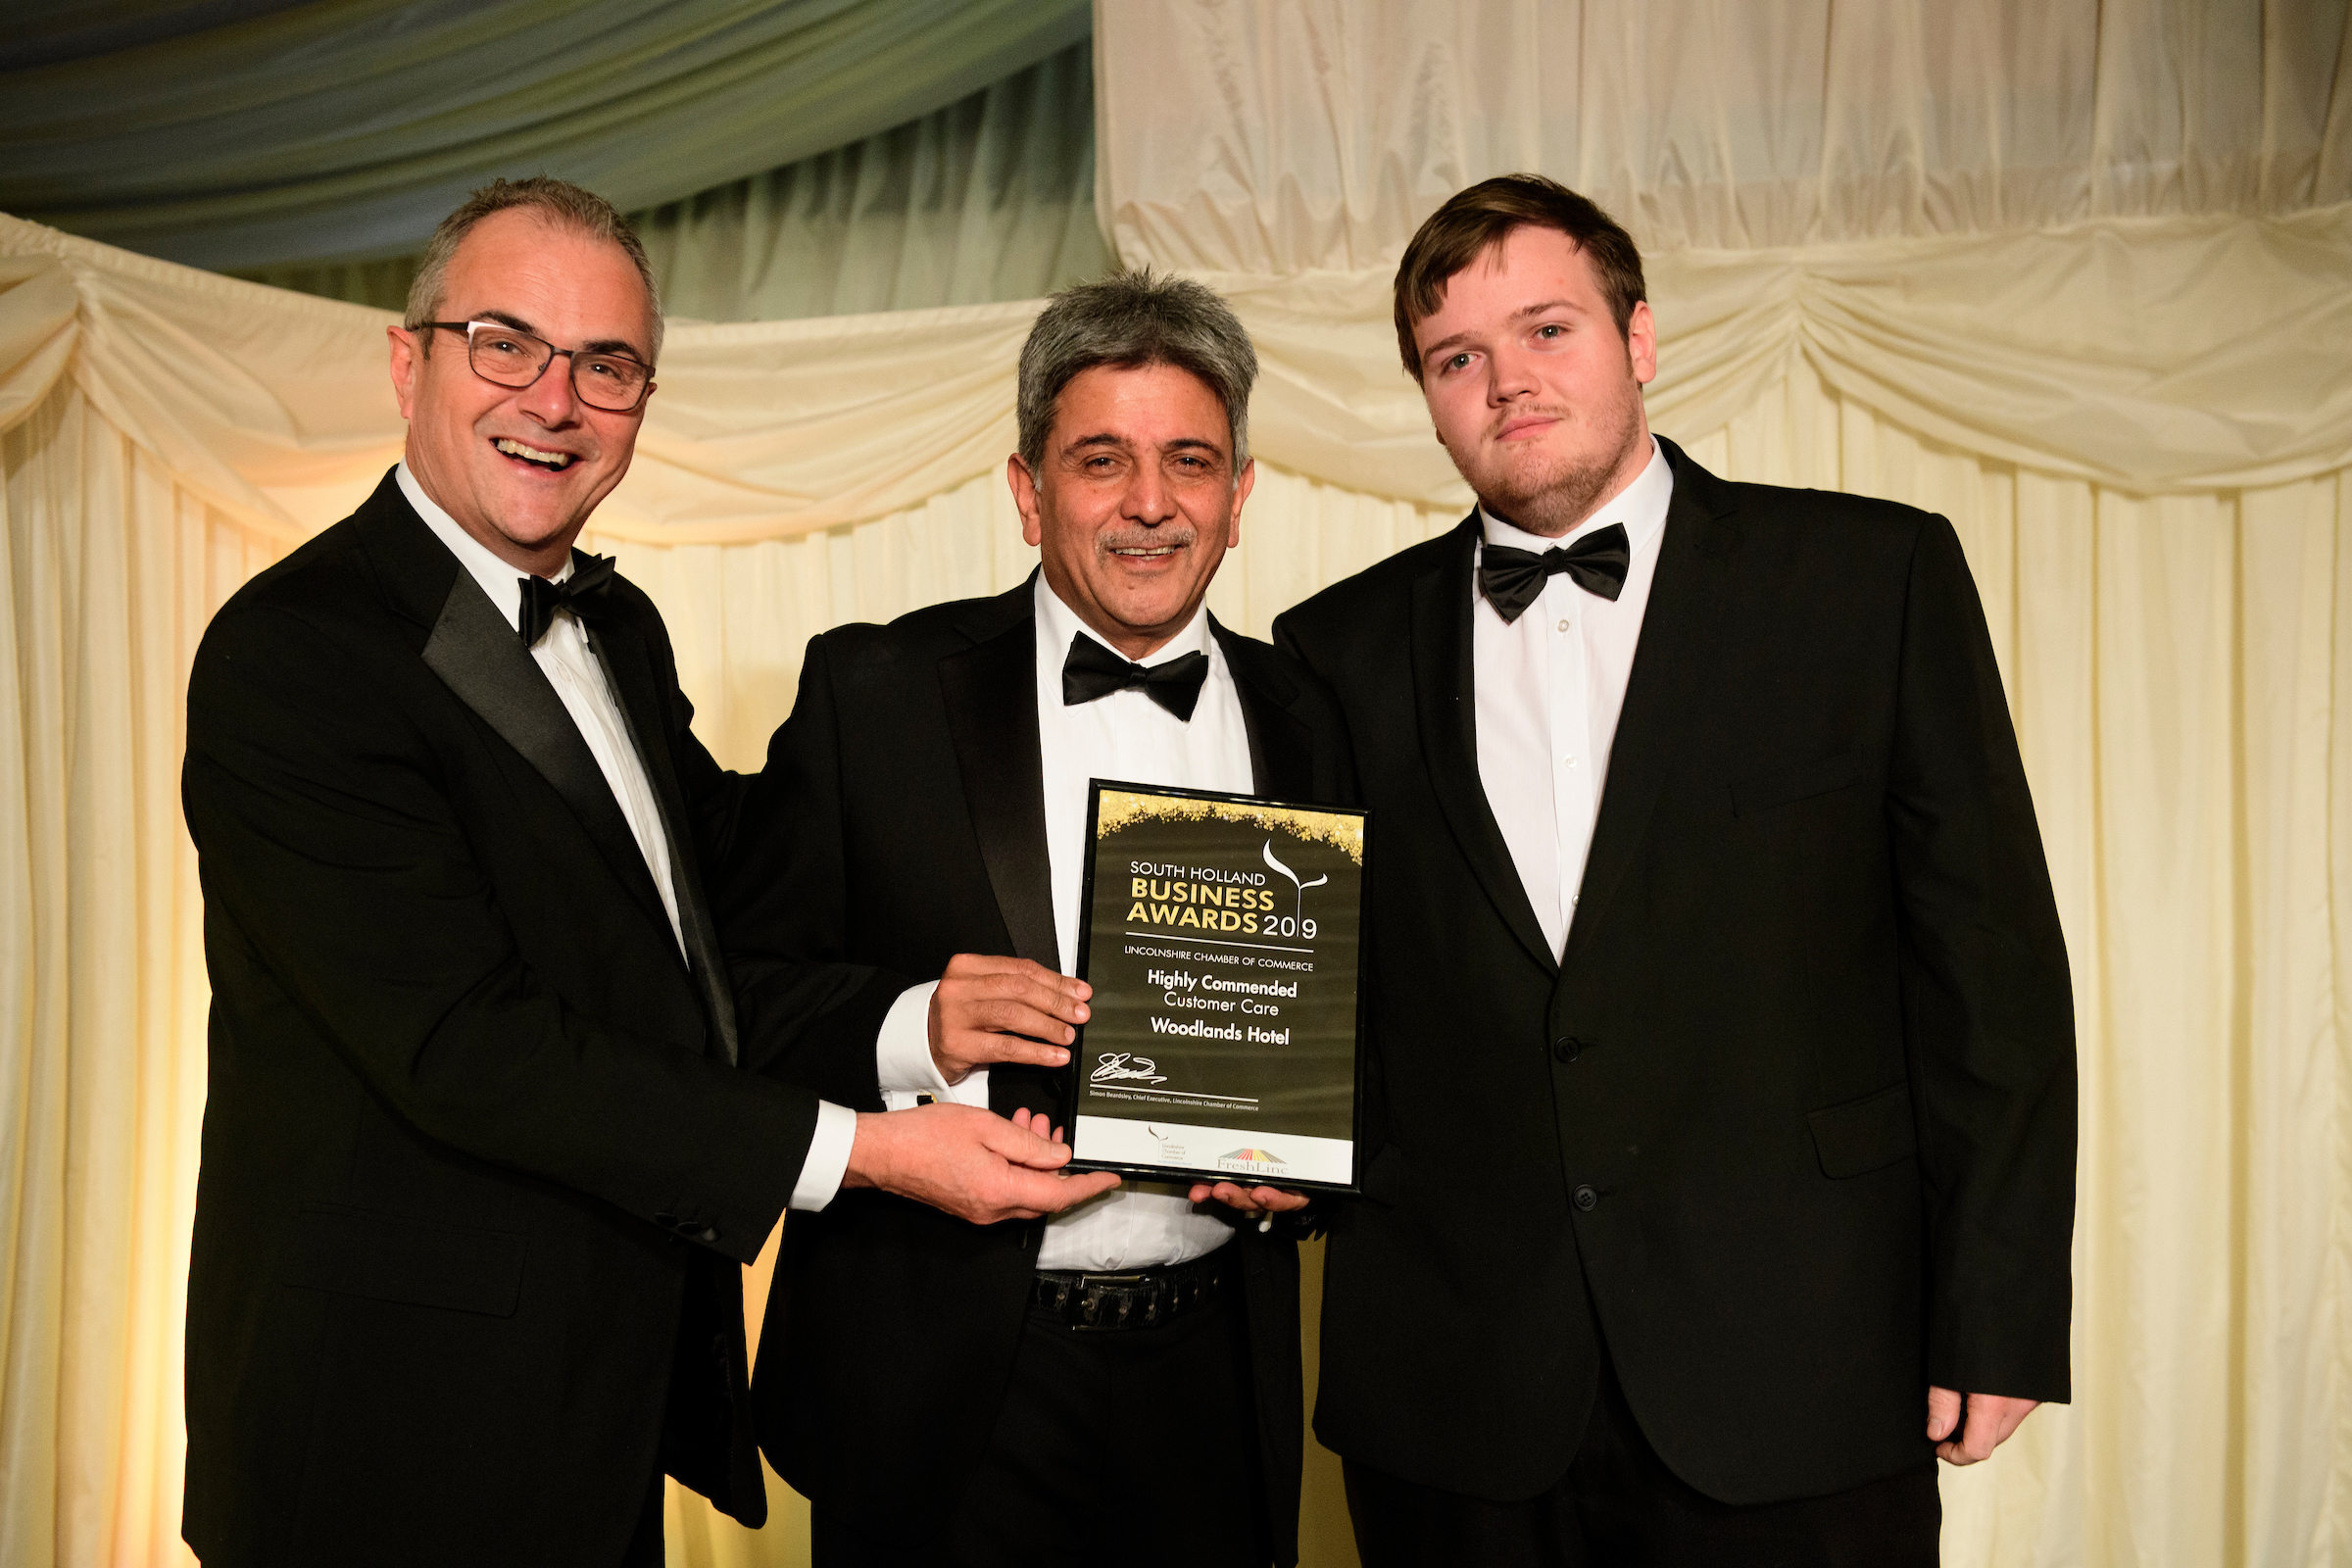 Three men in formal evening wear holding trophies and certificates and smiling at the South Holland Business Awards 2019